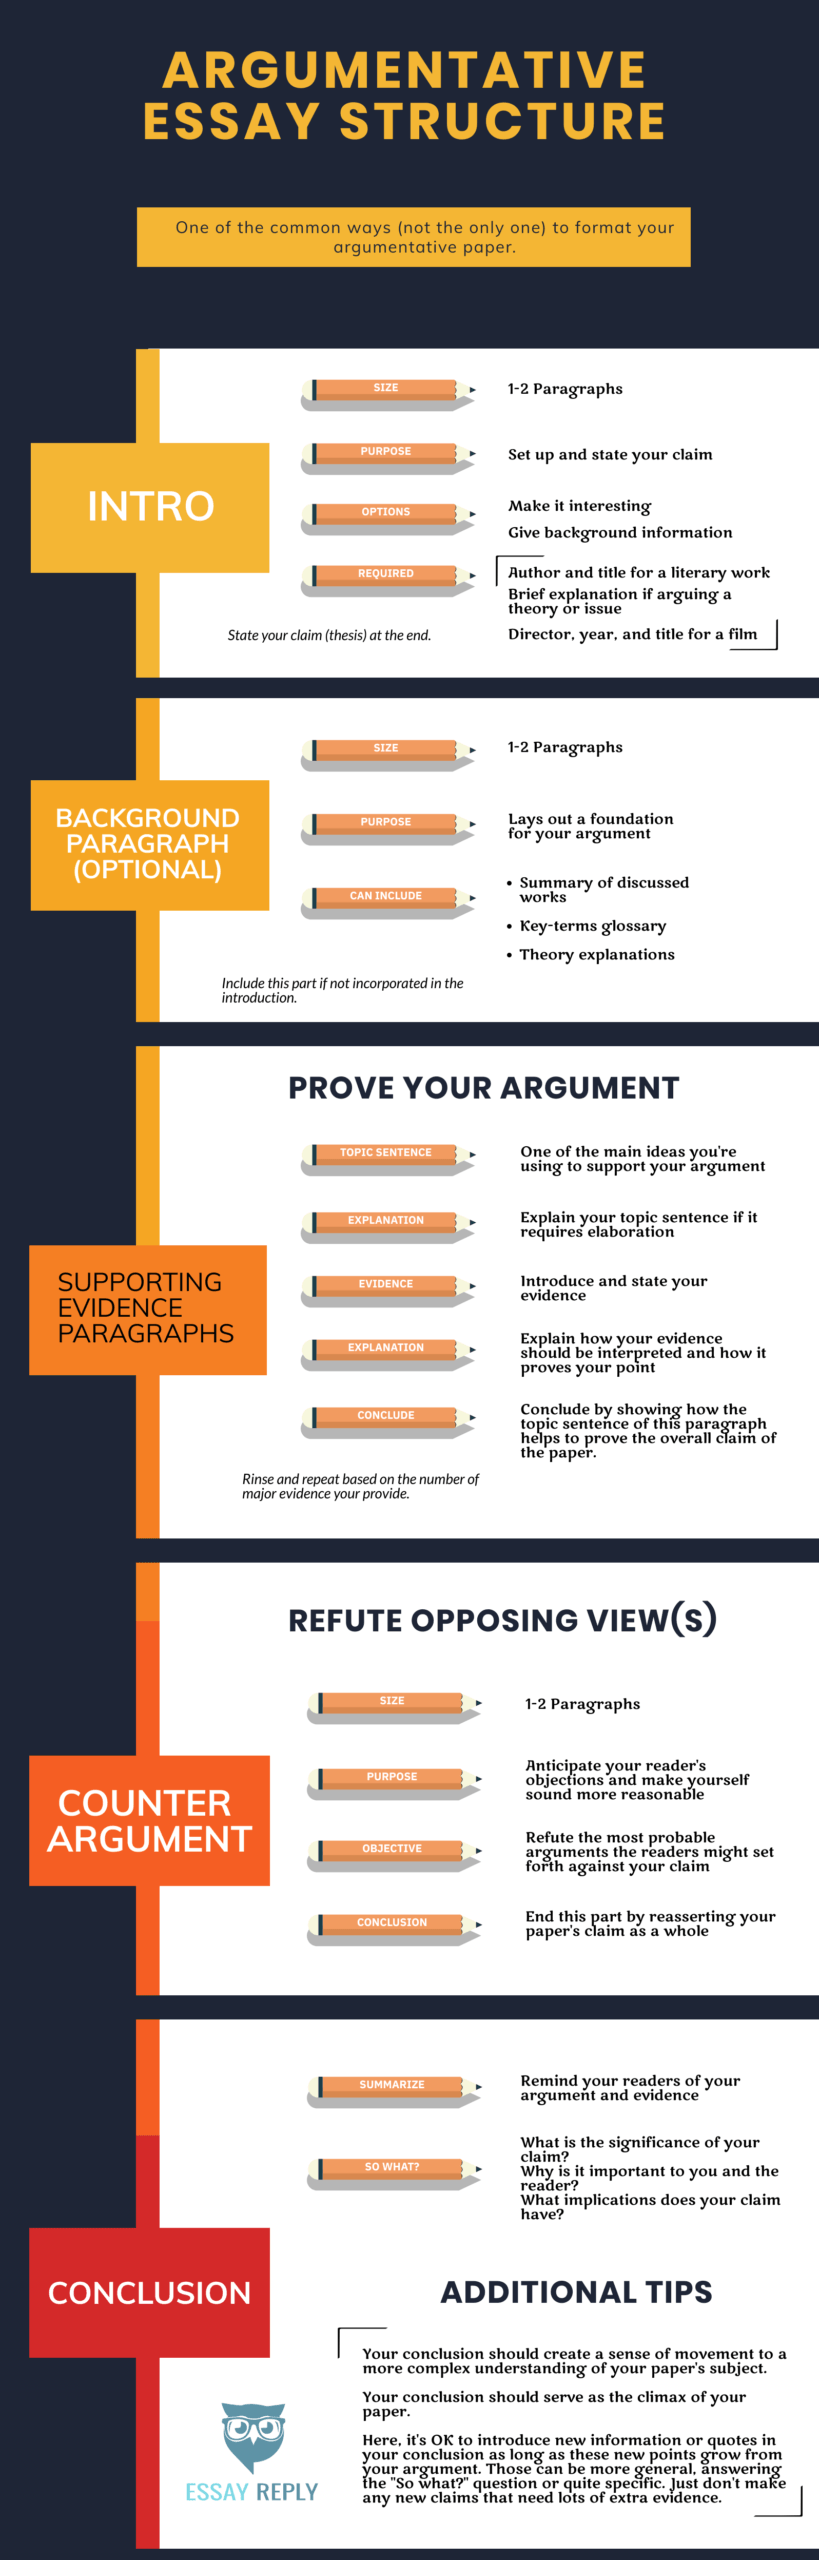 What Is an Argumentative Essay? Definition and Examples